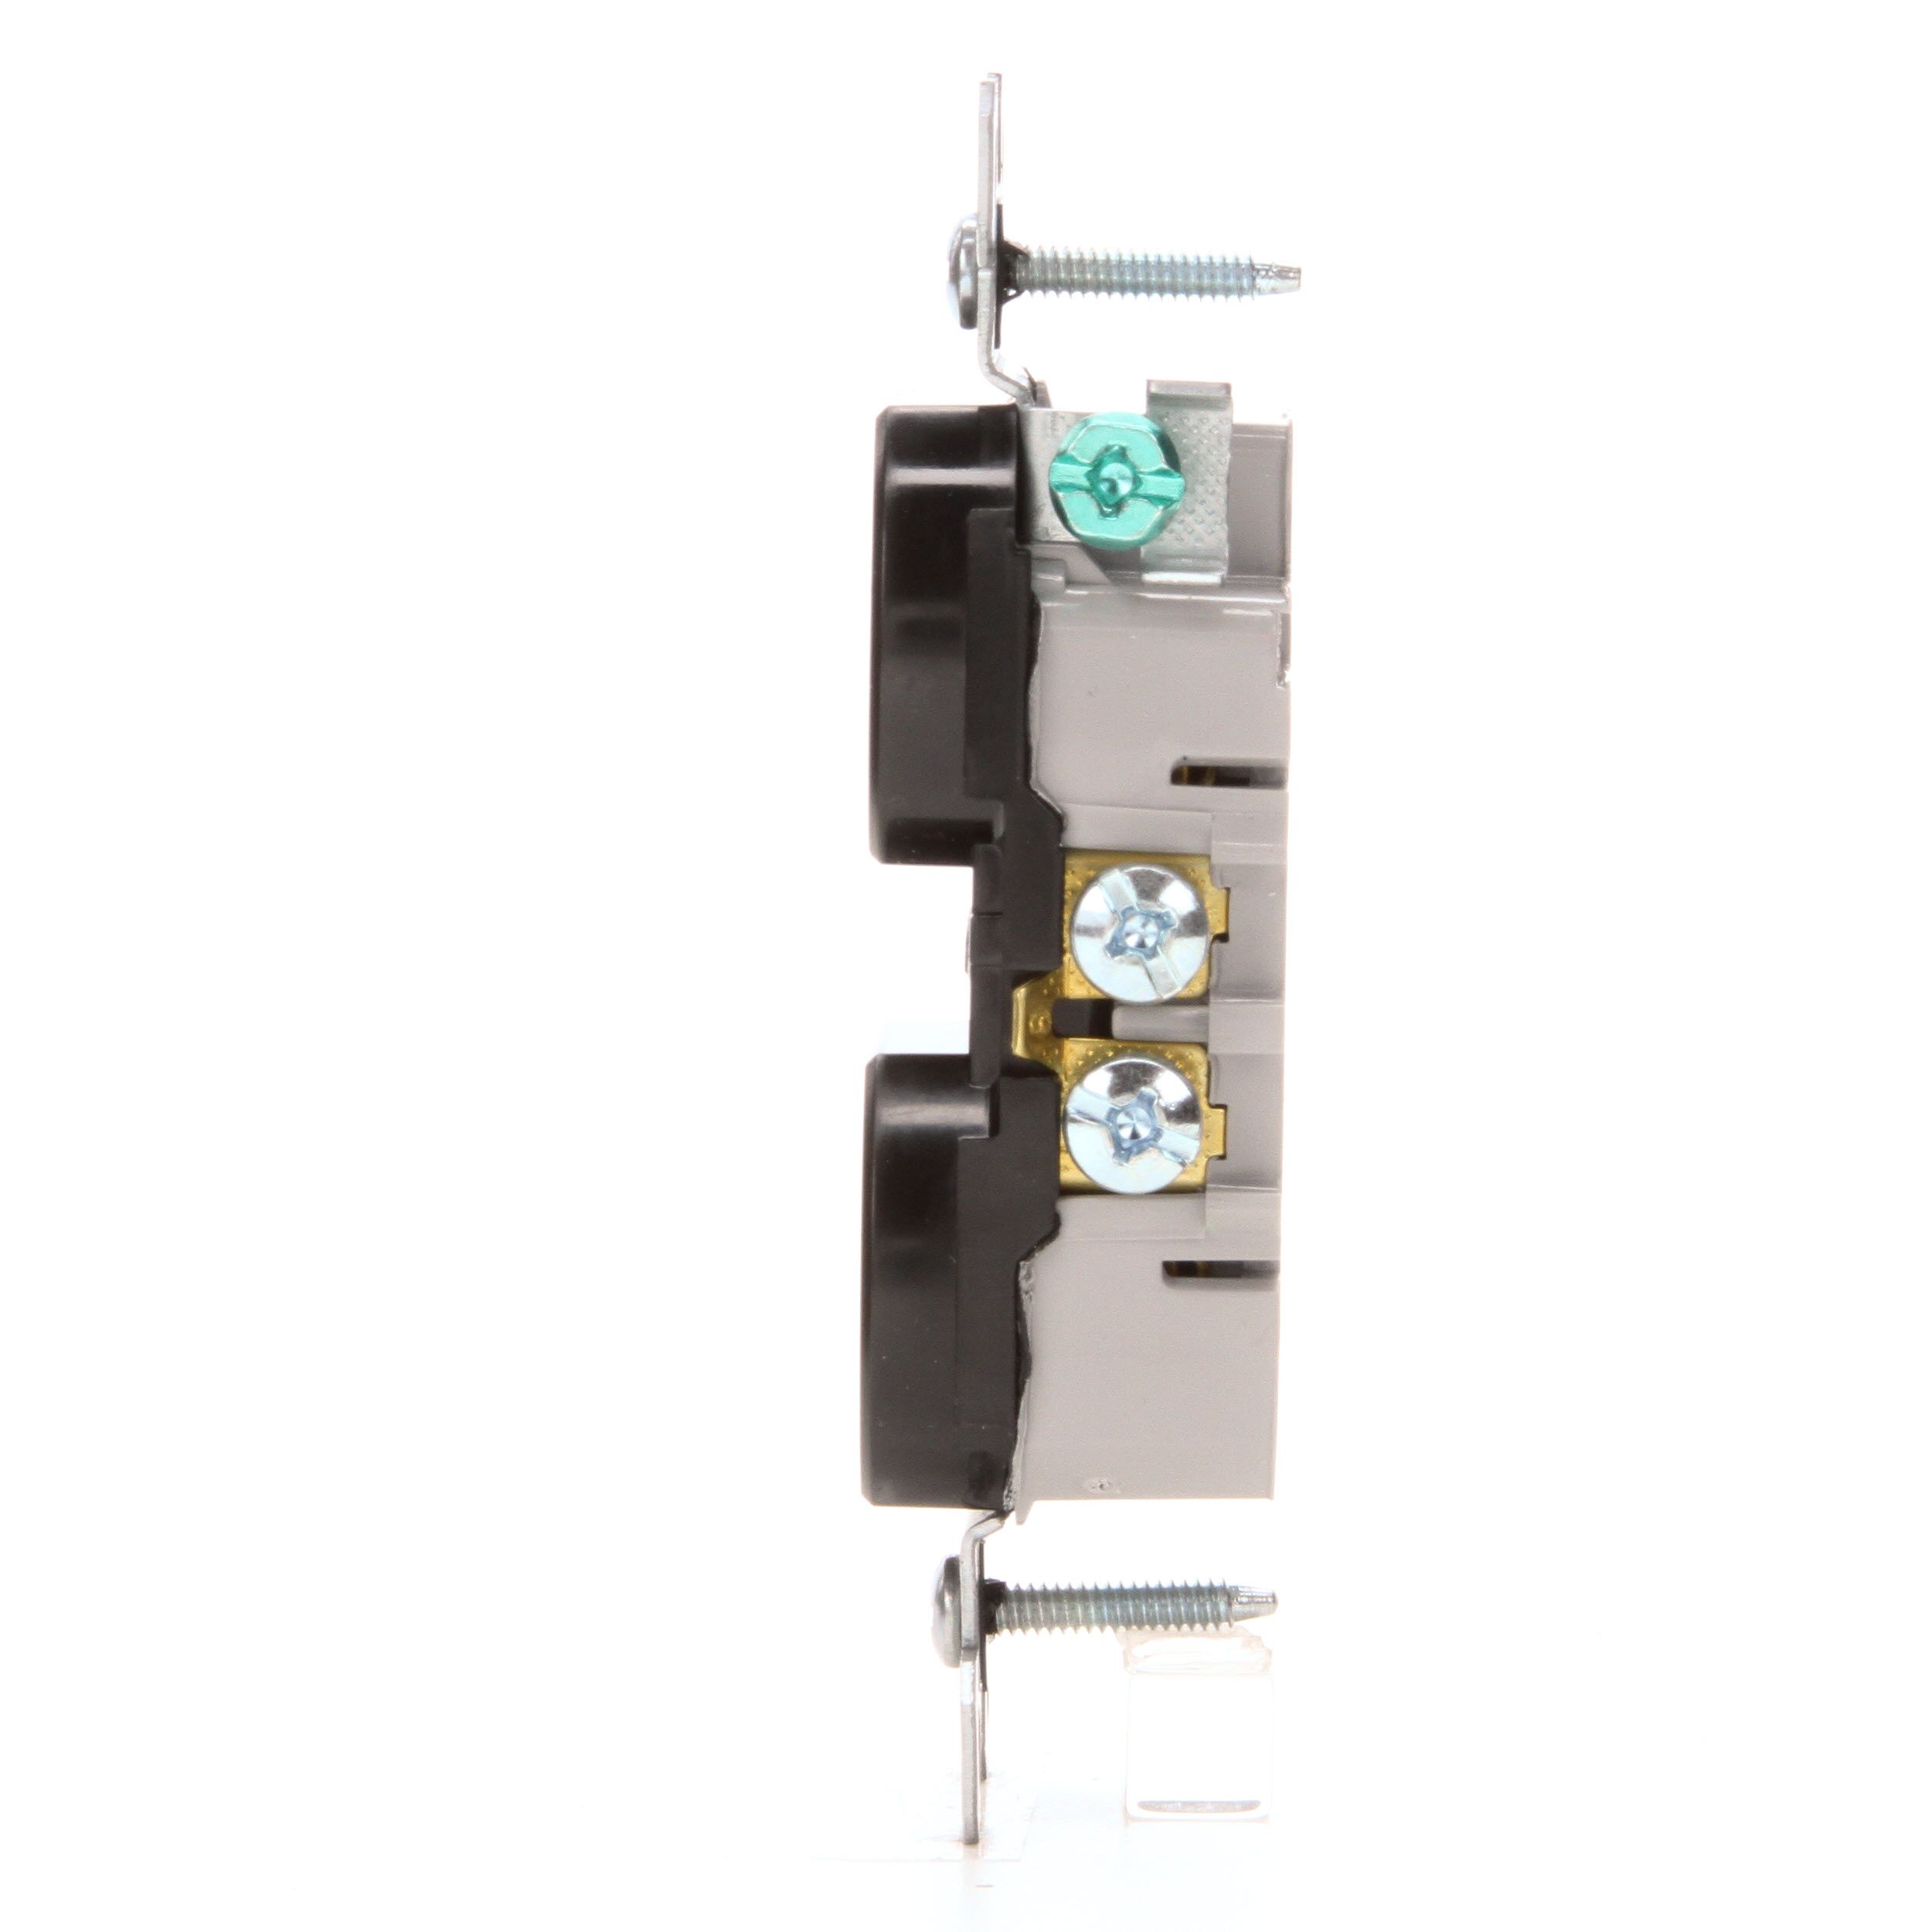 East to Install Black Legrand-Pass & Seymour 224CC10 15-Amp Residential Connector 